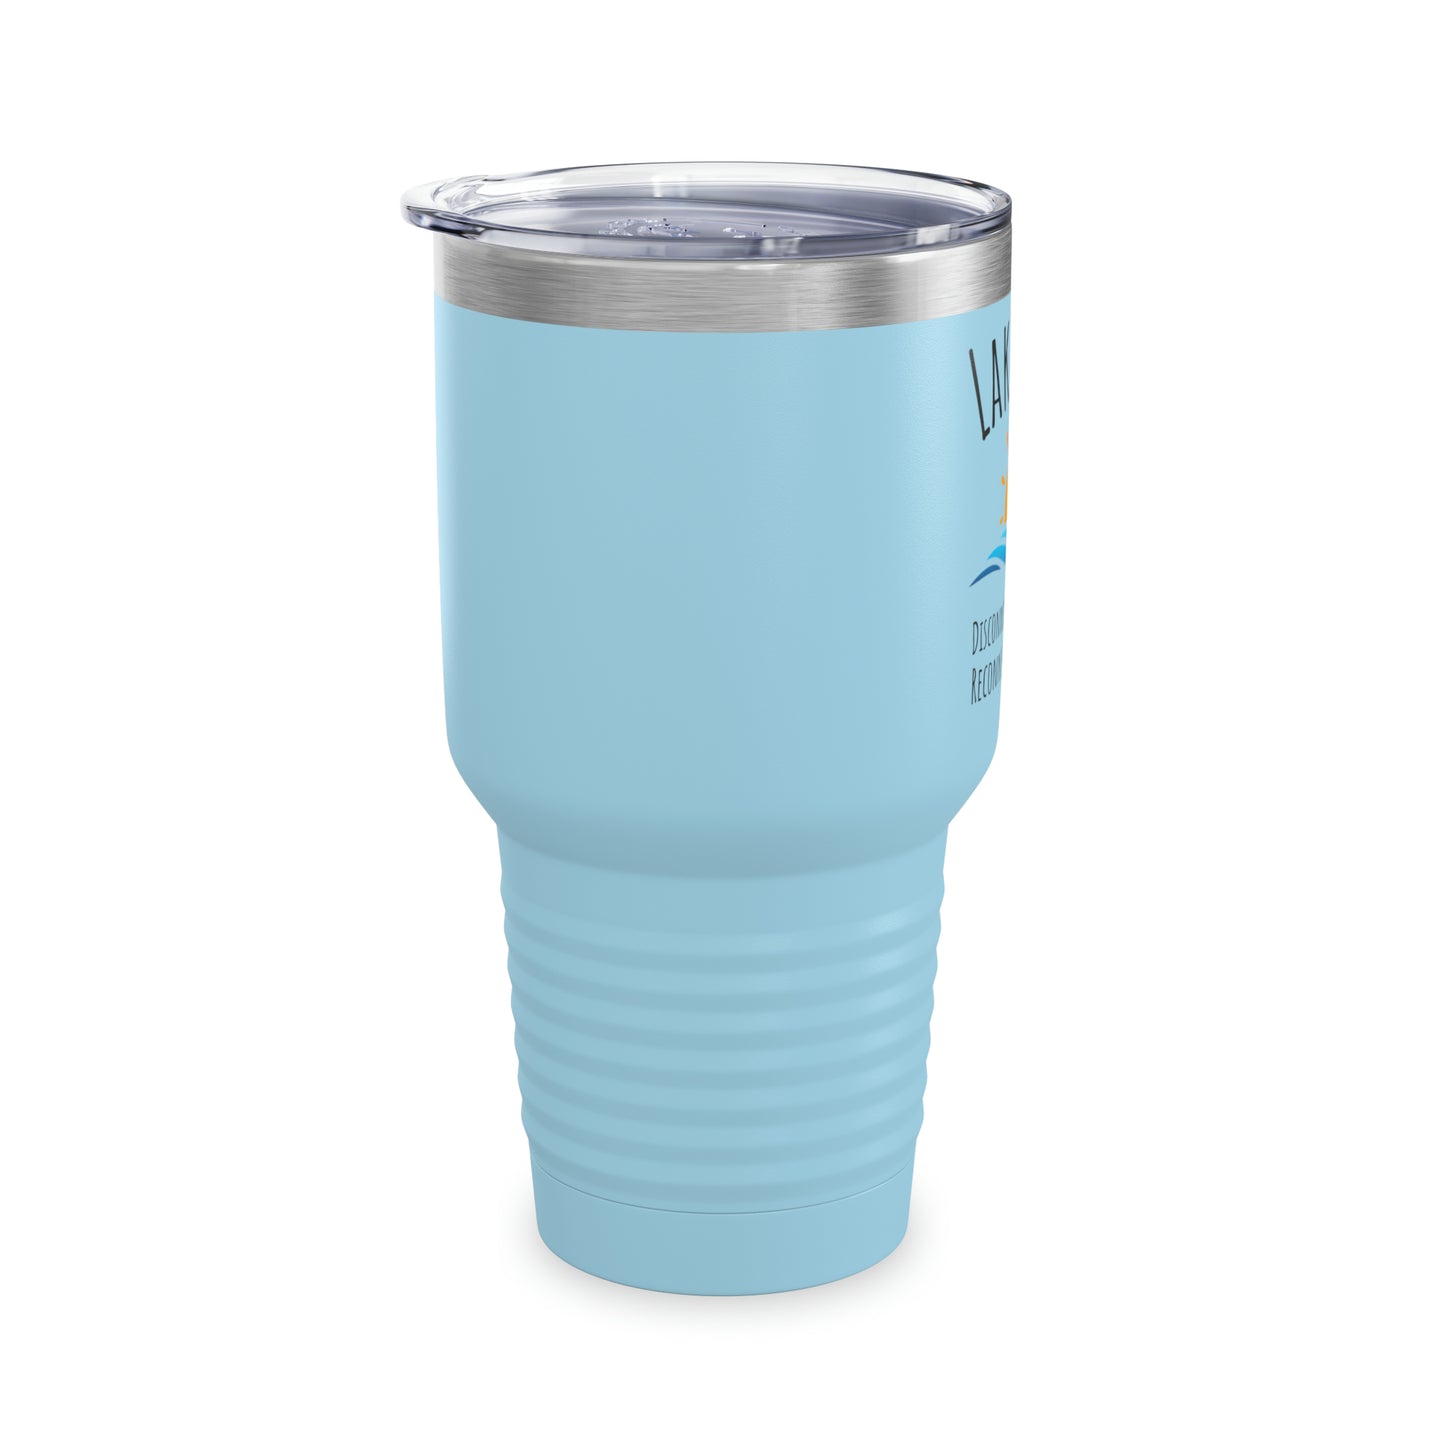 "Lake Life - Disconnect your mind, reconnect your soul" Ringneck Tumbler, 30oz